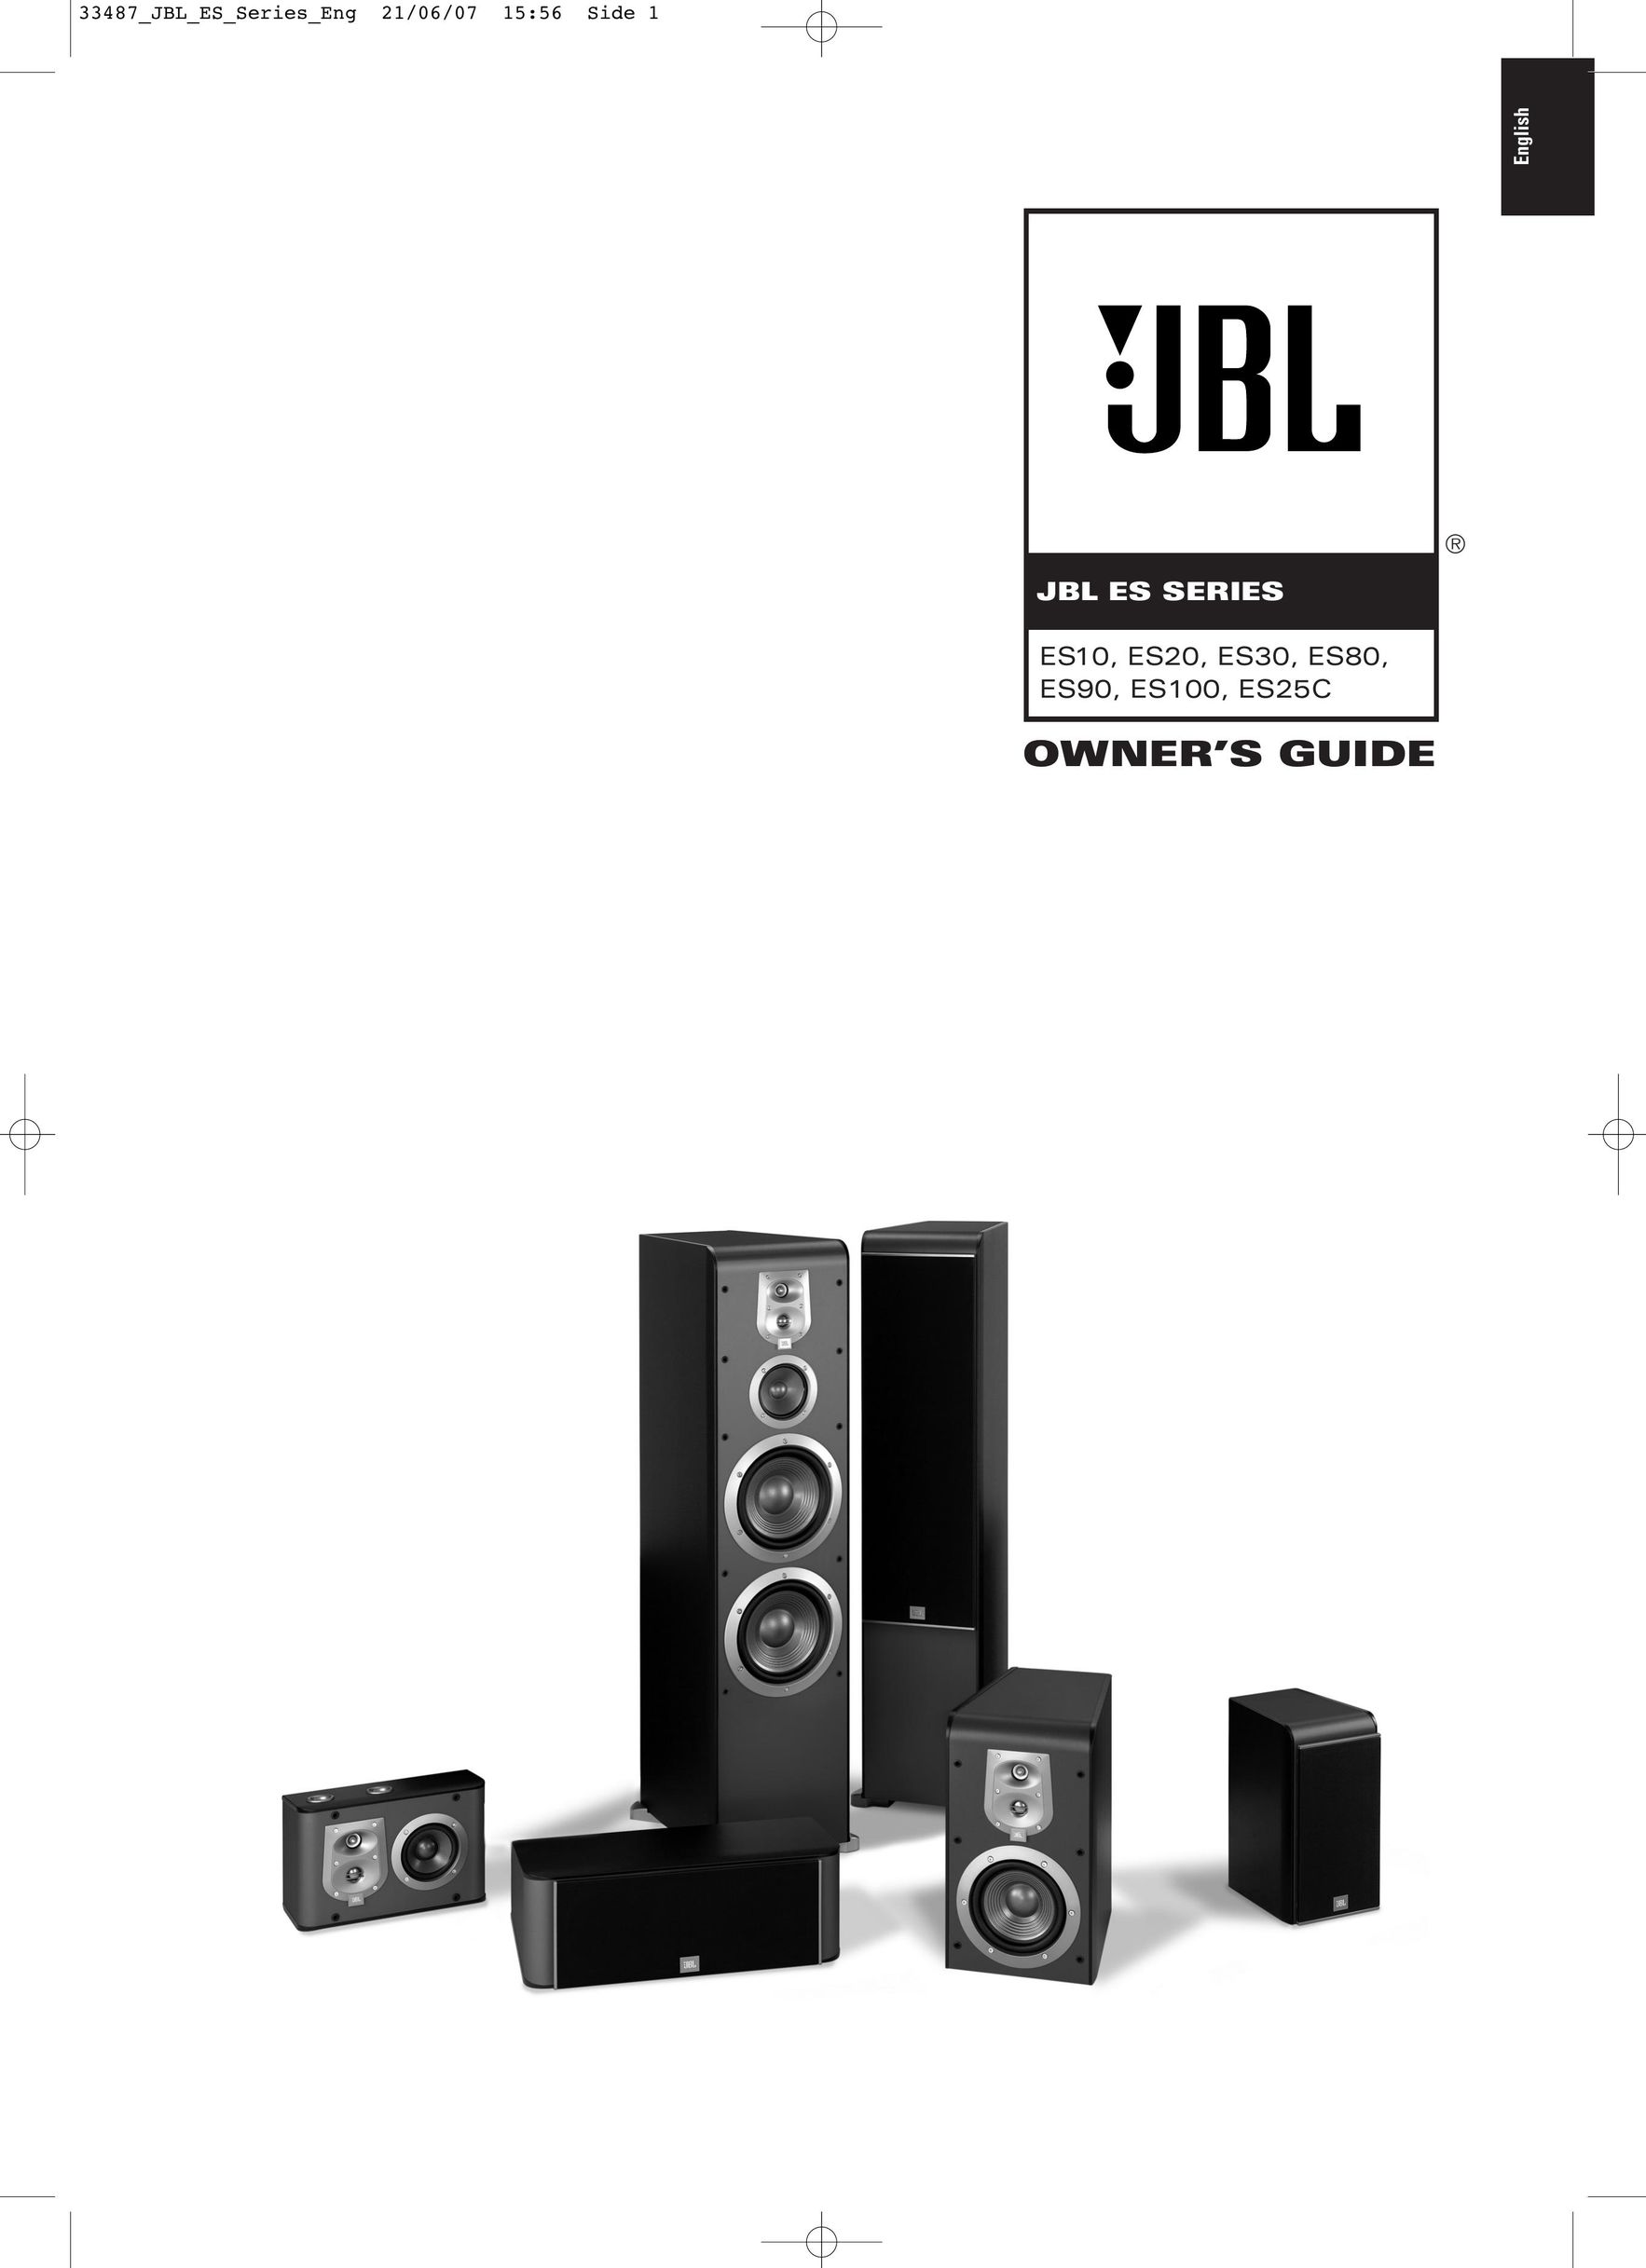 JBL ES20 Home Theater System User Manual